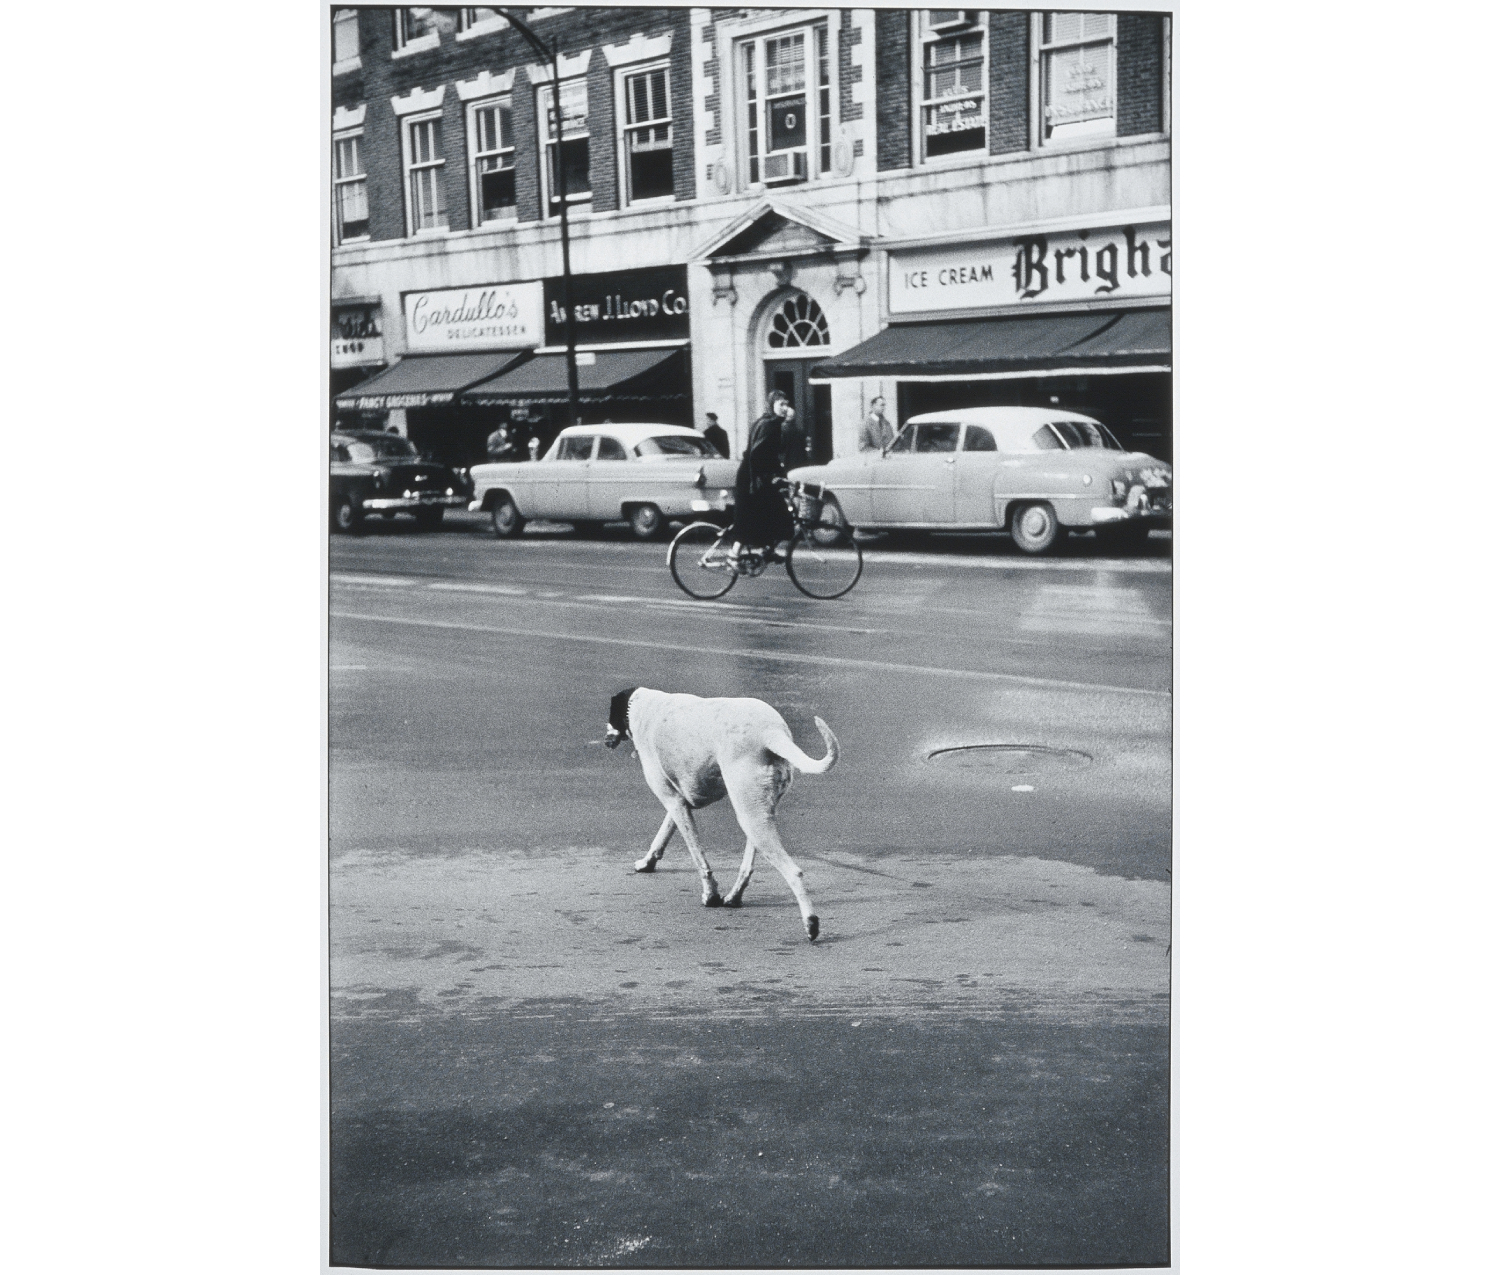 City street, short-haired, light colored dog with dark head walking away from camera at front center; bicyclist in mid center; parked cars before storefronts with Brisham's, J. Lloyd Company and Cardullo's signs in background.